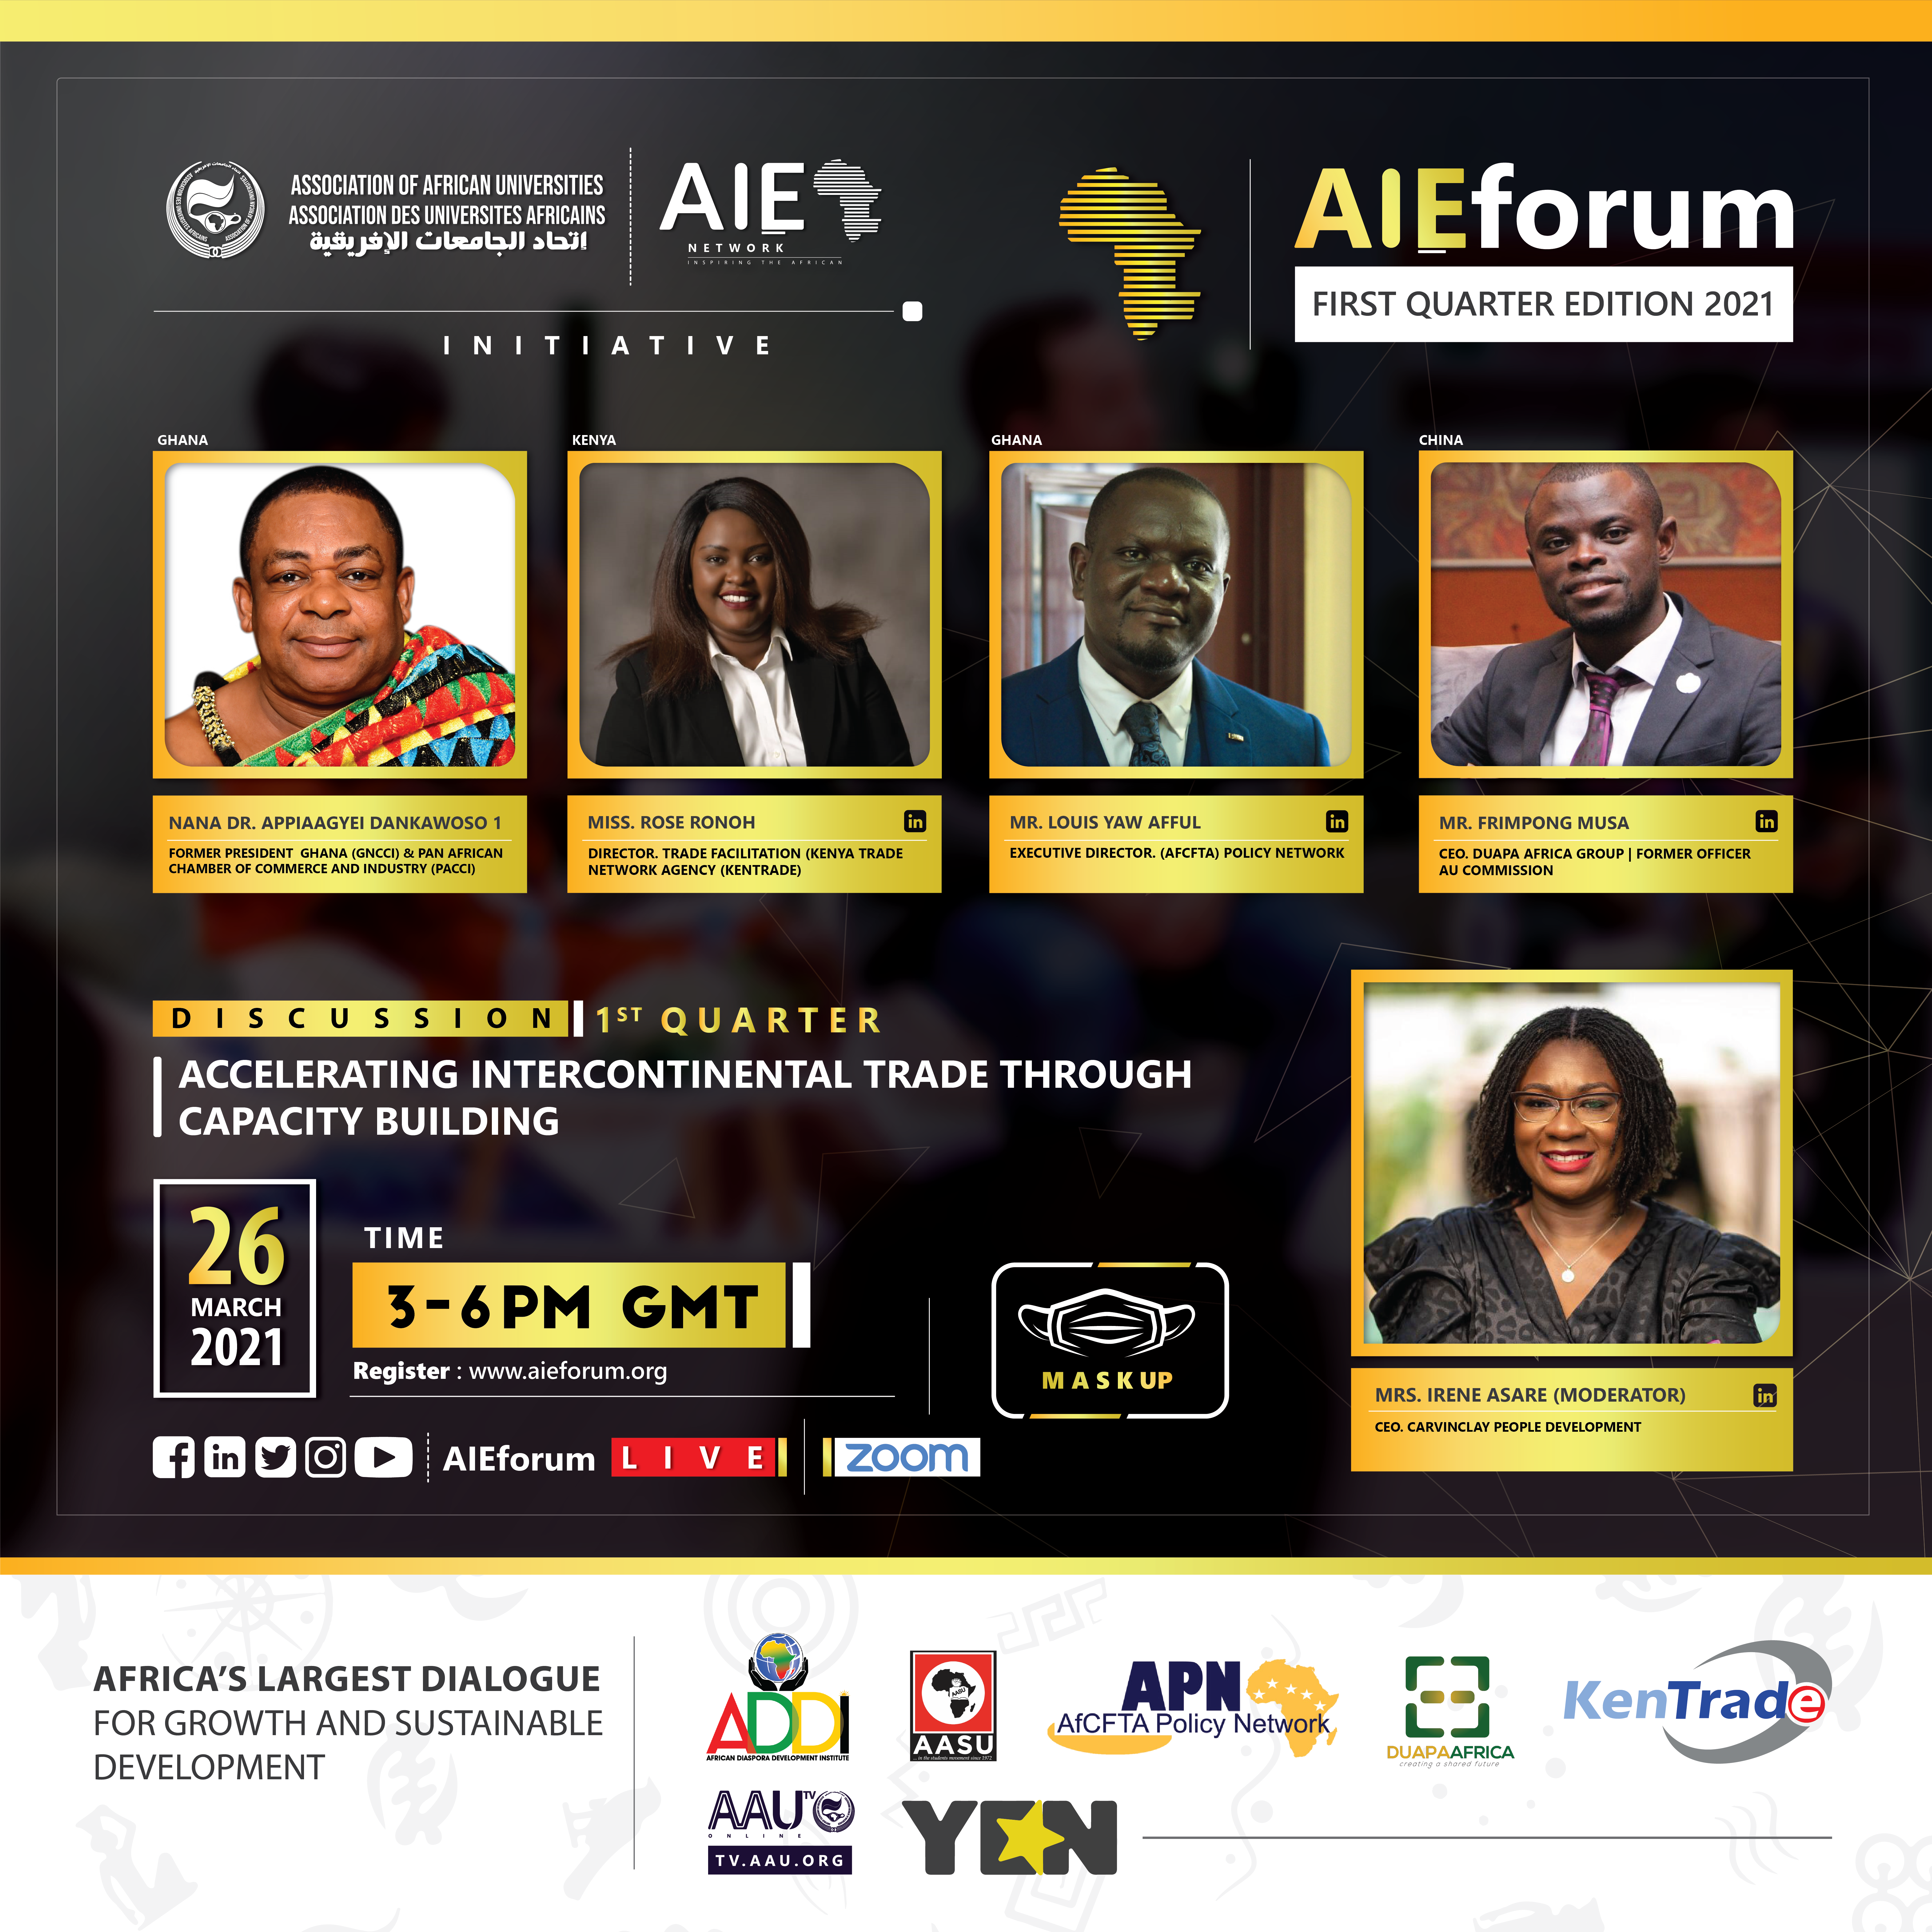 AIEforum 2021 First Quarter Edition Comes Off On March 26